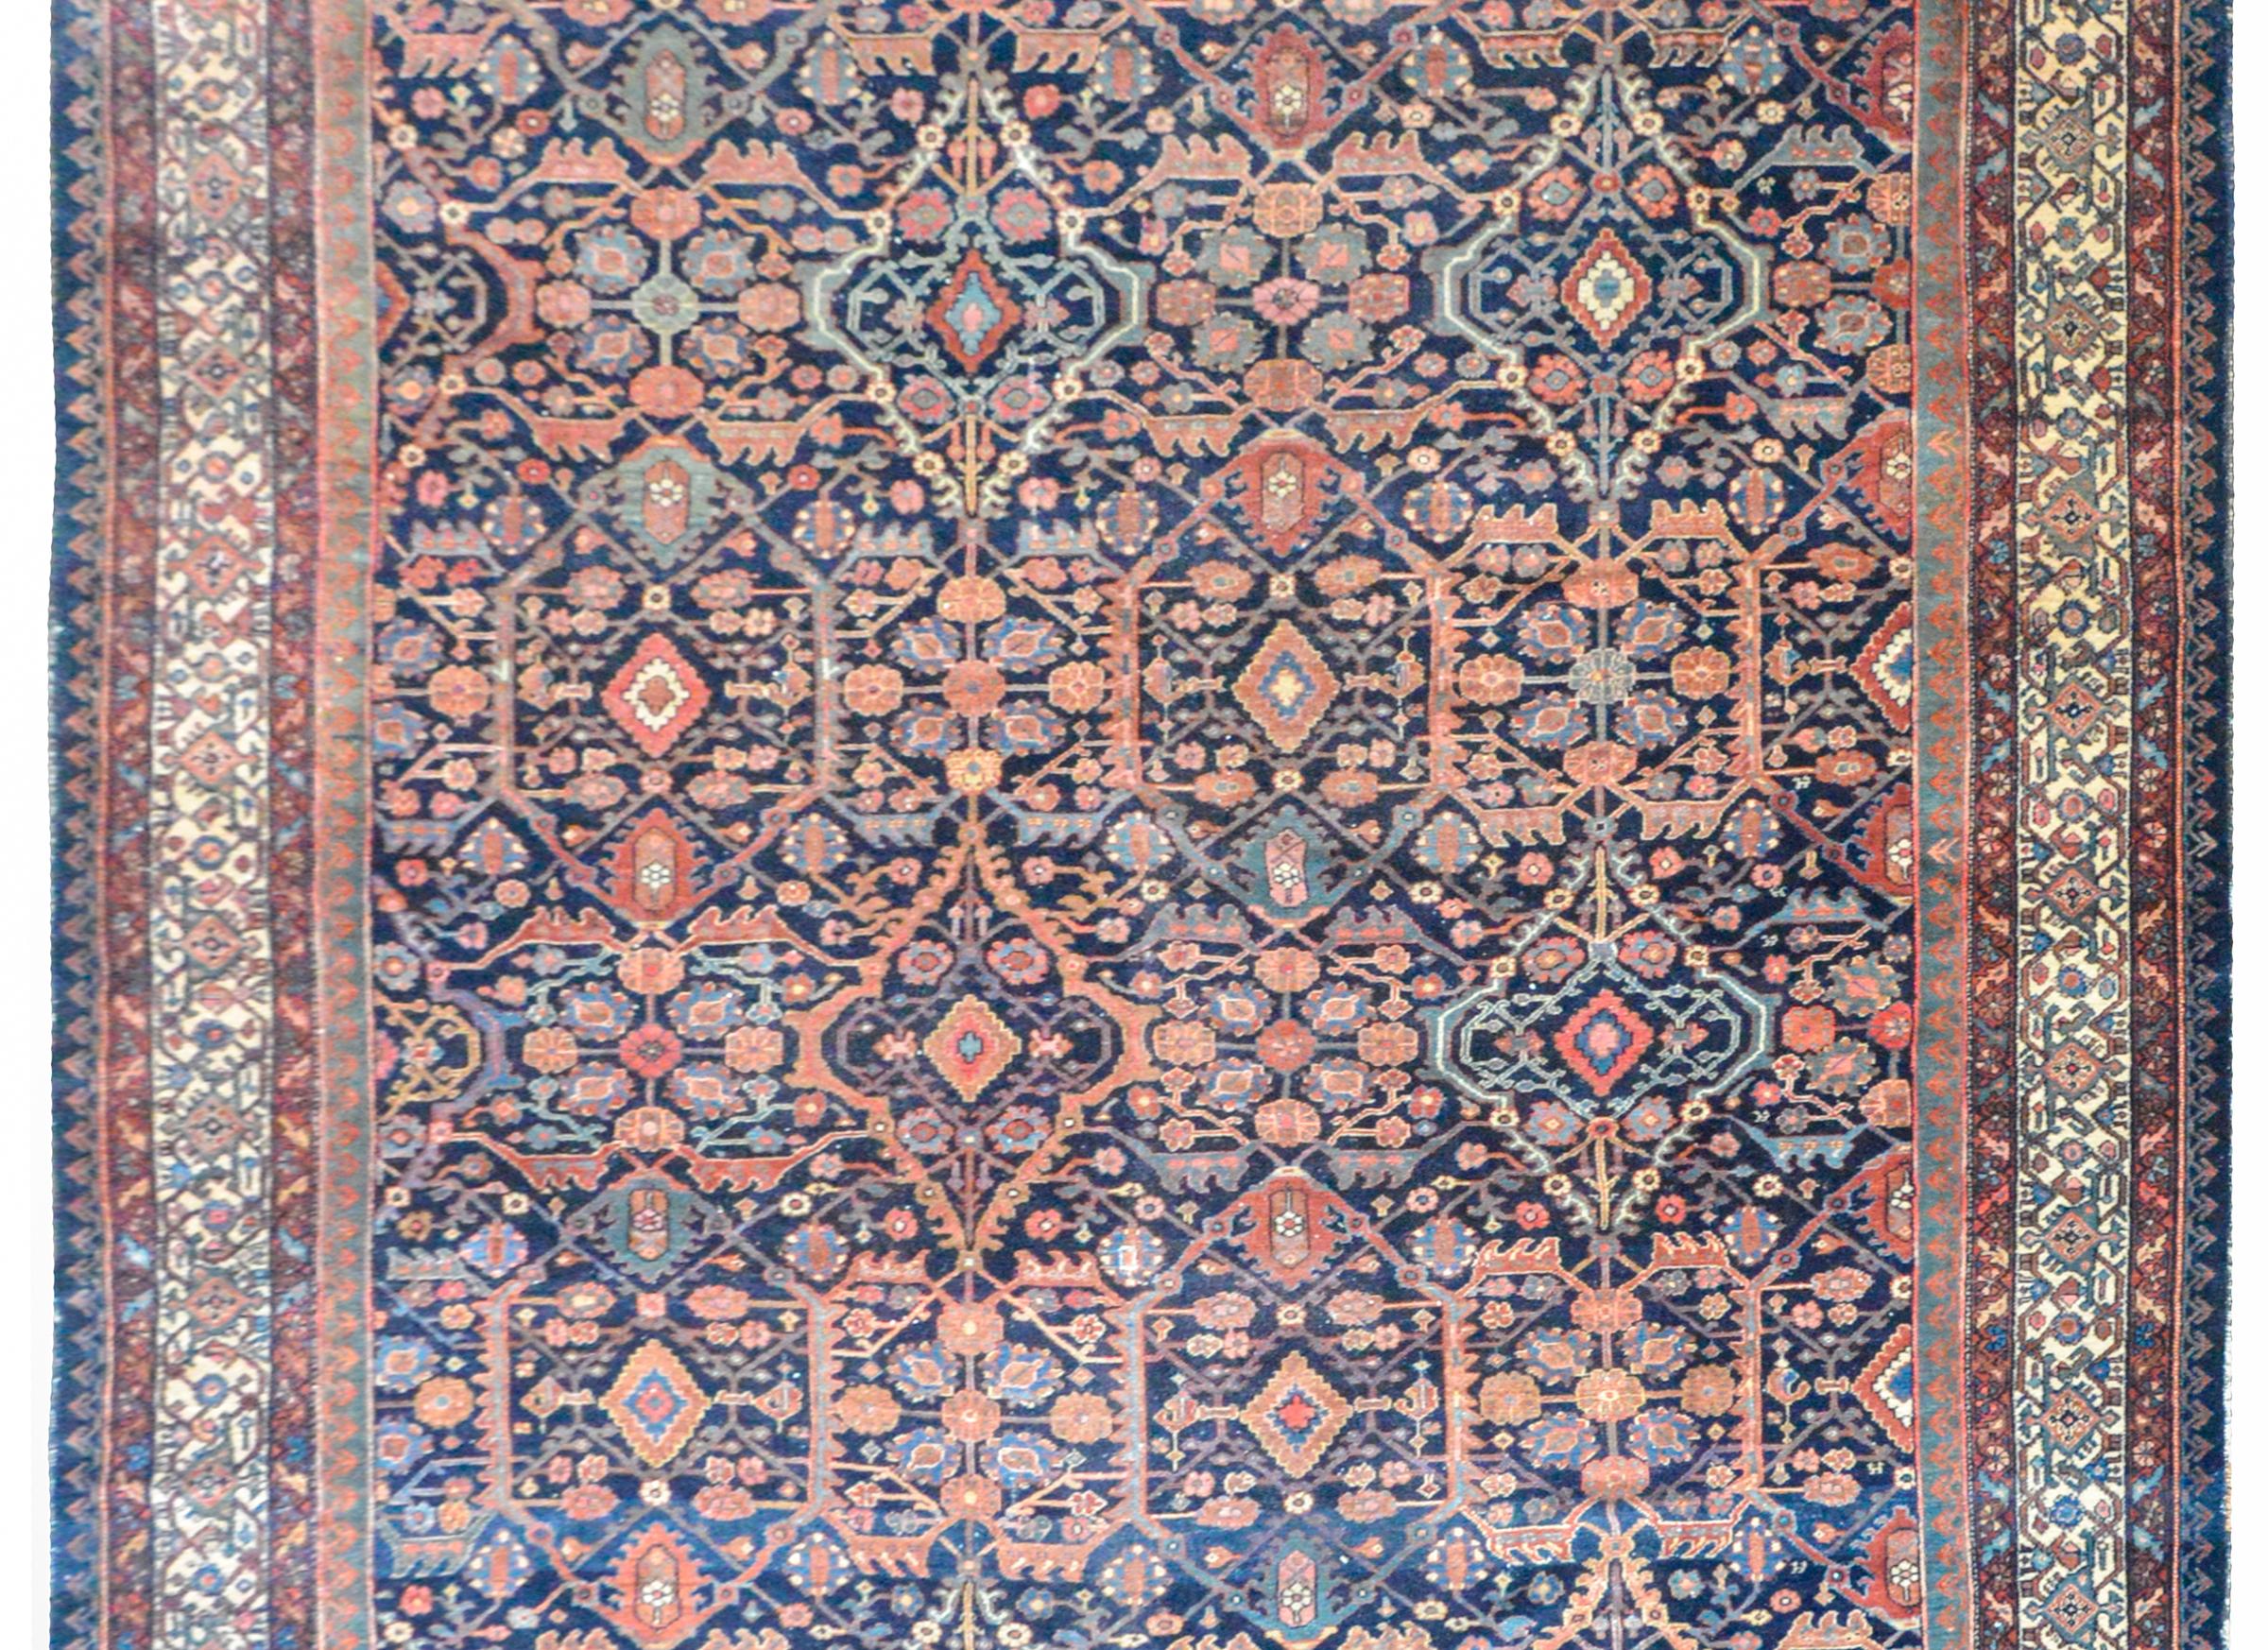 A wonderful early 20th century Persian Malayer rug with a repeated mirrored floral trellis pattern woven crimson, pink, light indigo, and cream, set against a dark indigo background, and surrounded by a border containing multiple petite floral